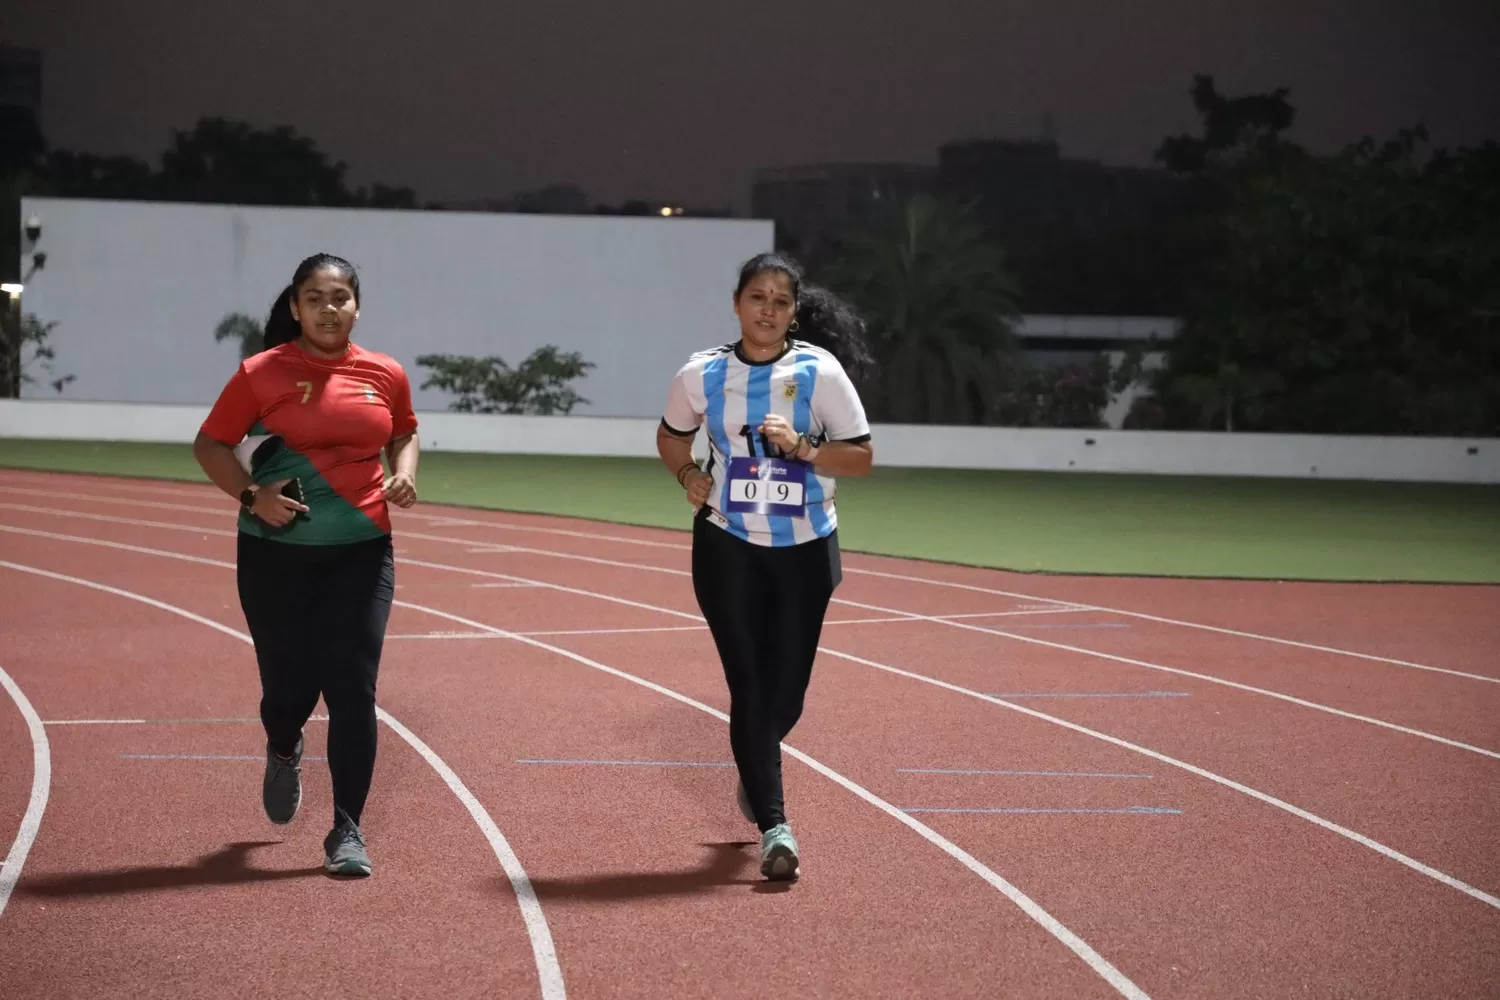 Participants running in the track